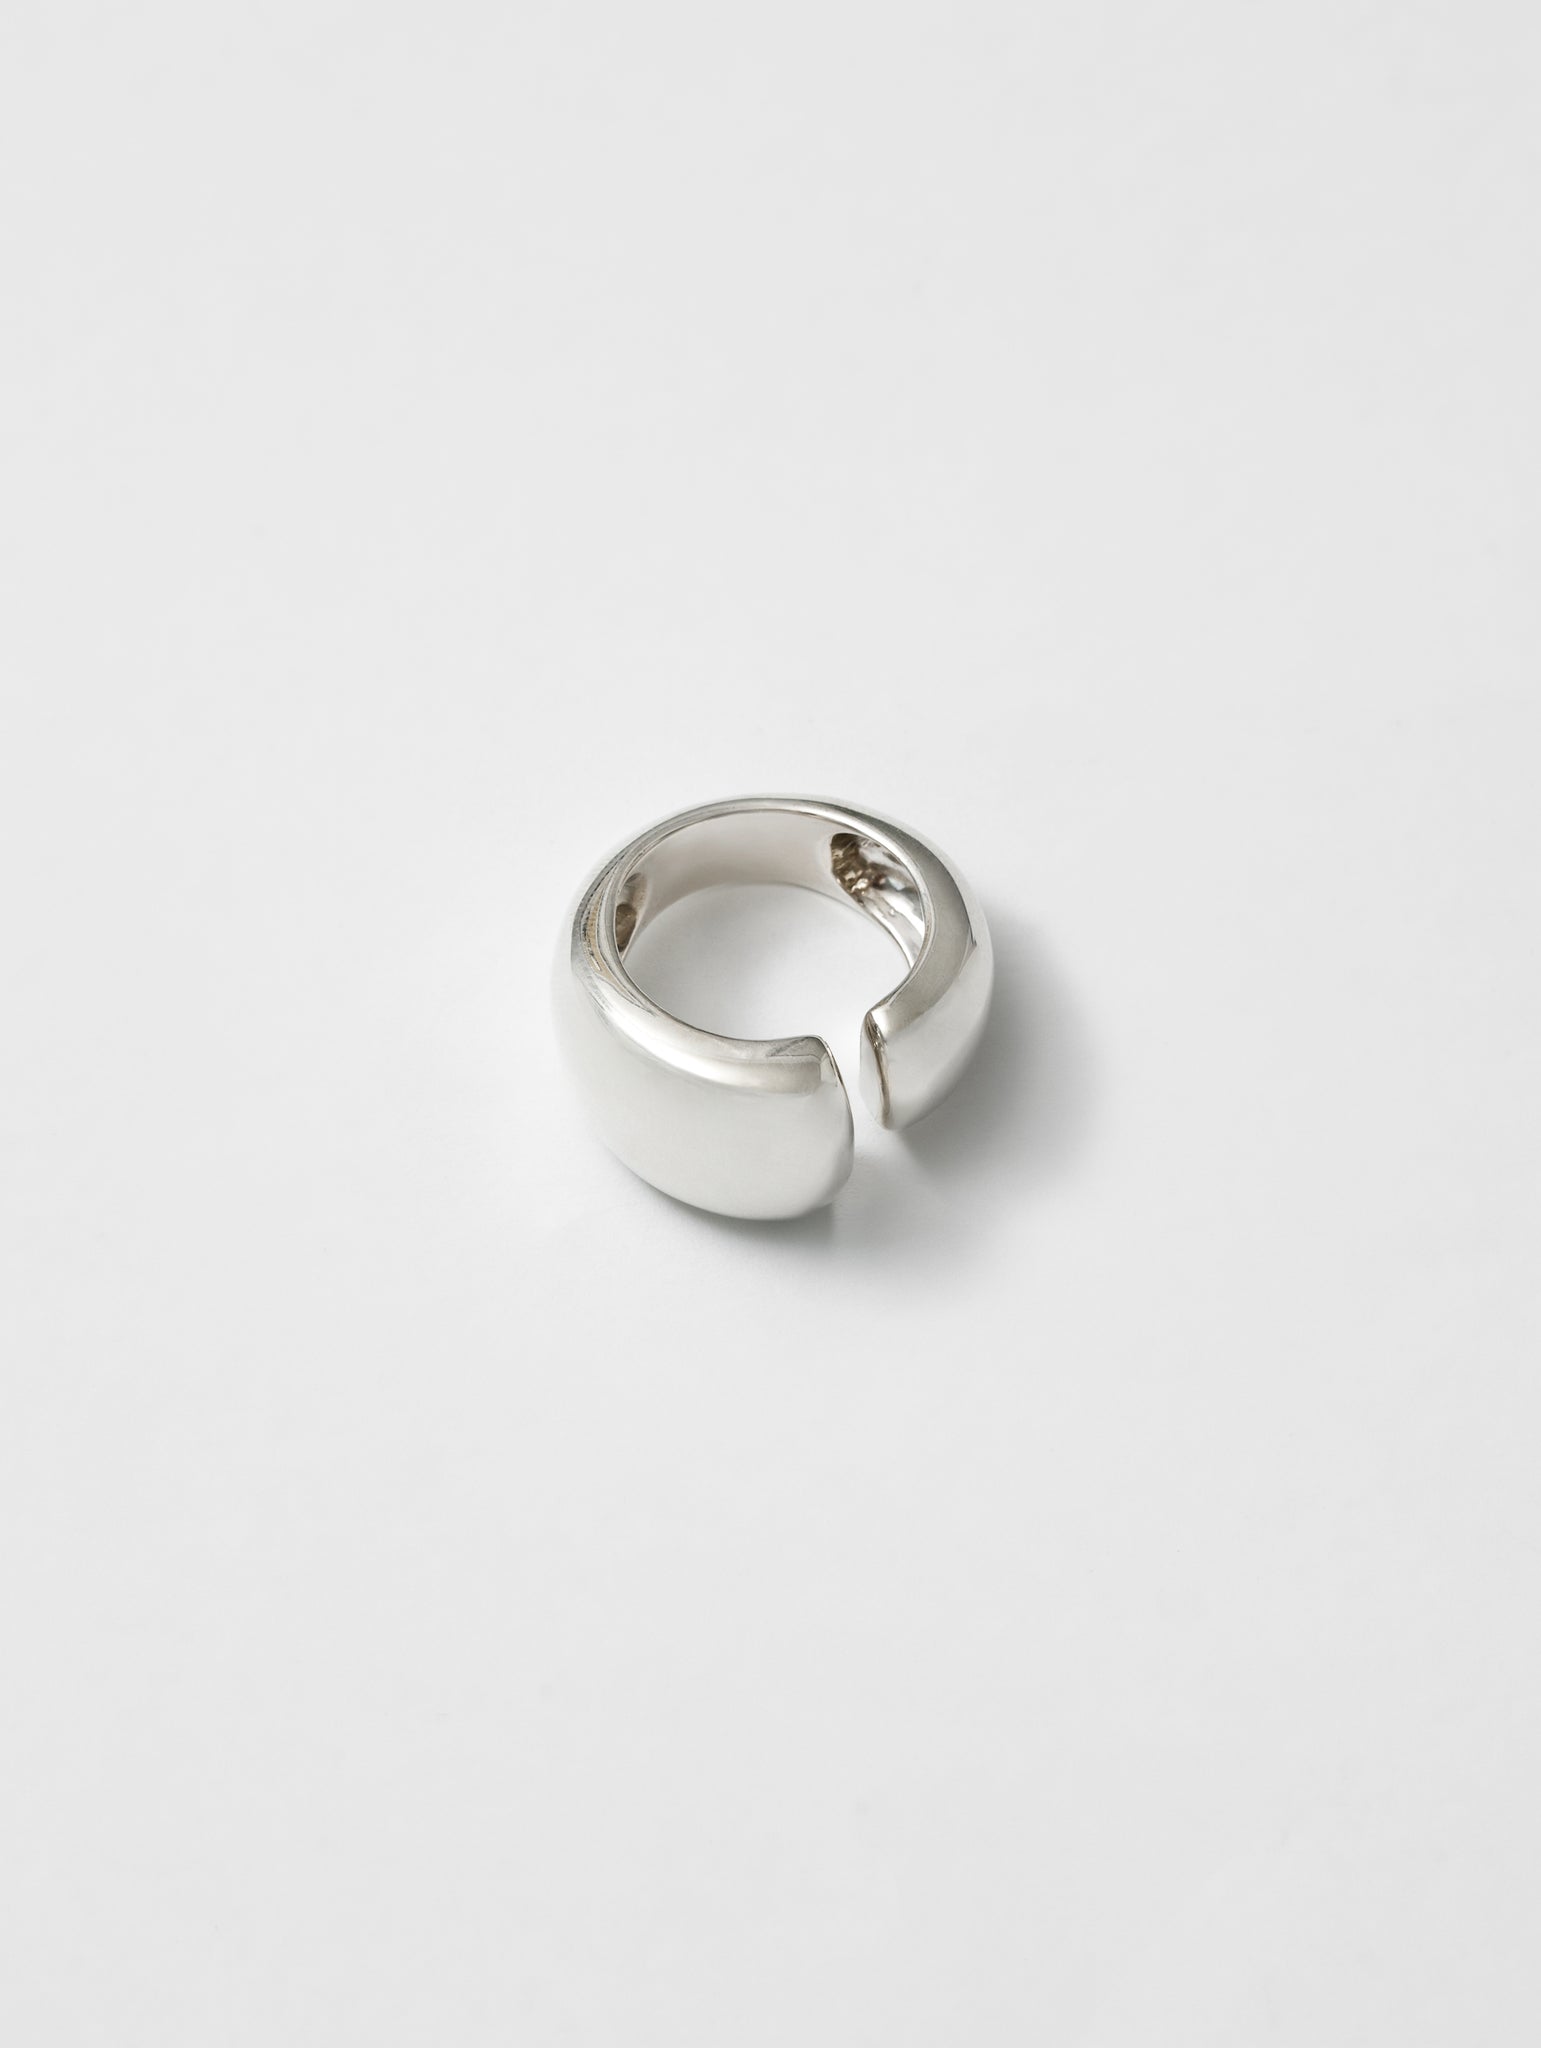 Wolf Circus Statement Gap Open Ring in Sterling Silver | Canal Ring in Sterling Silver